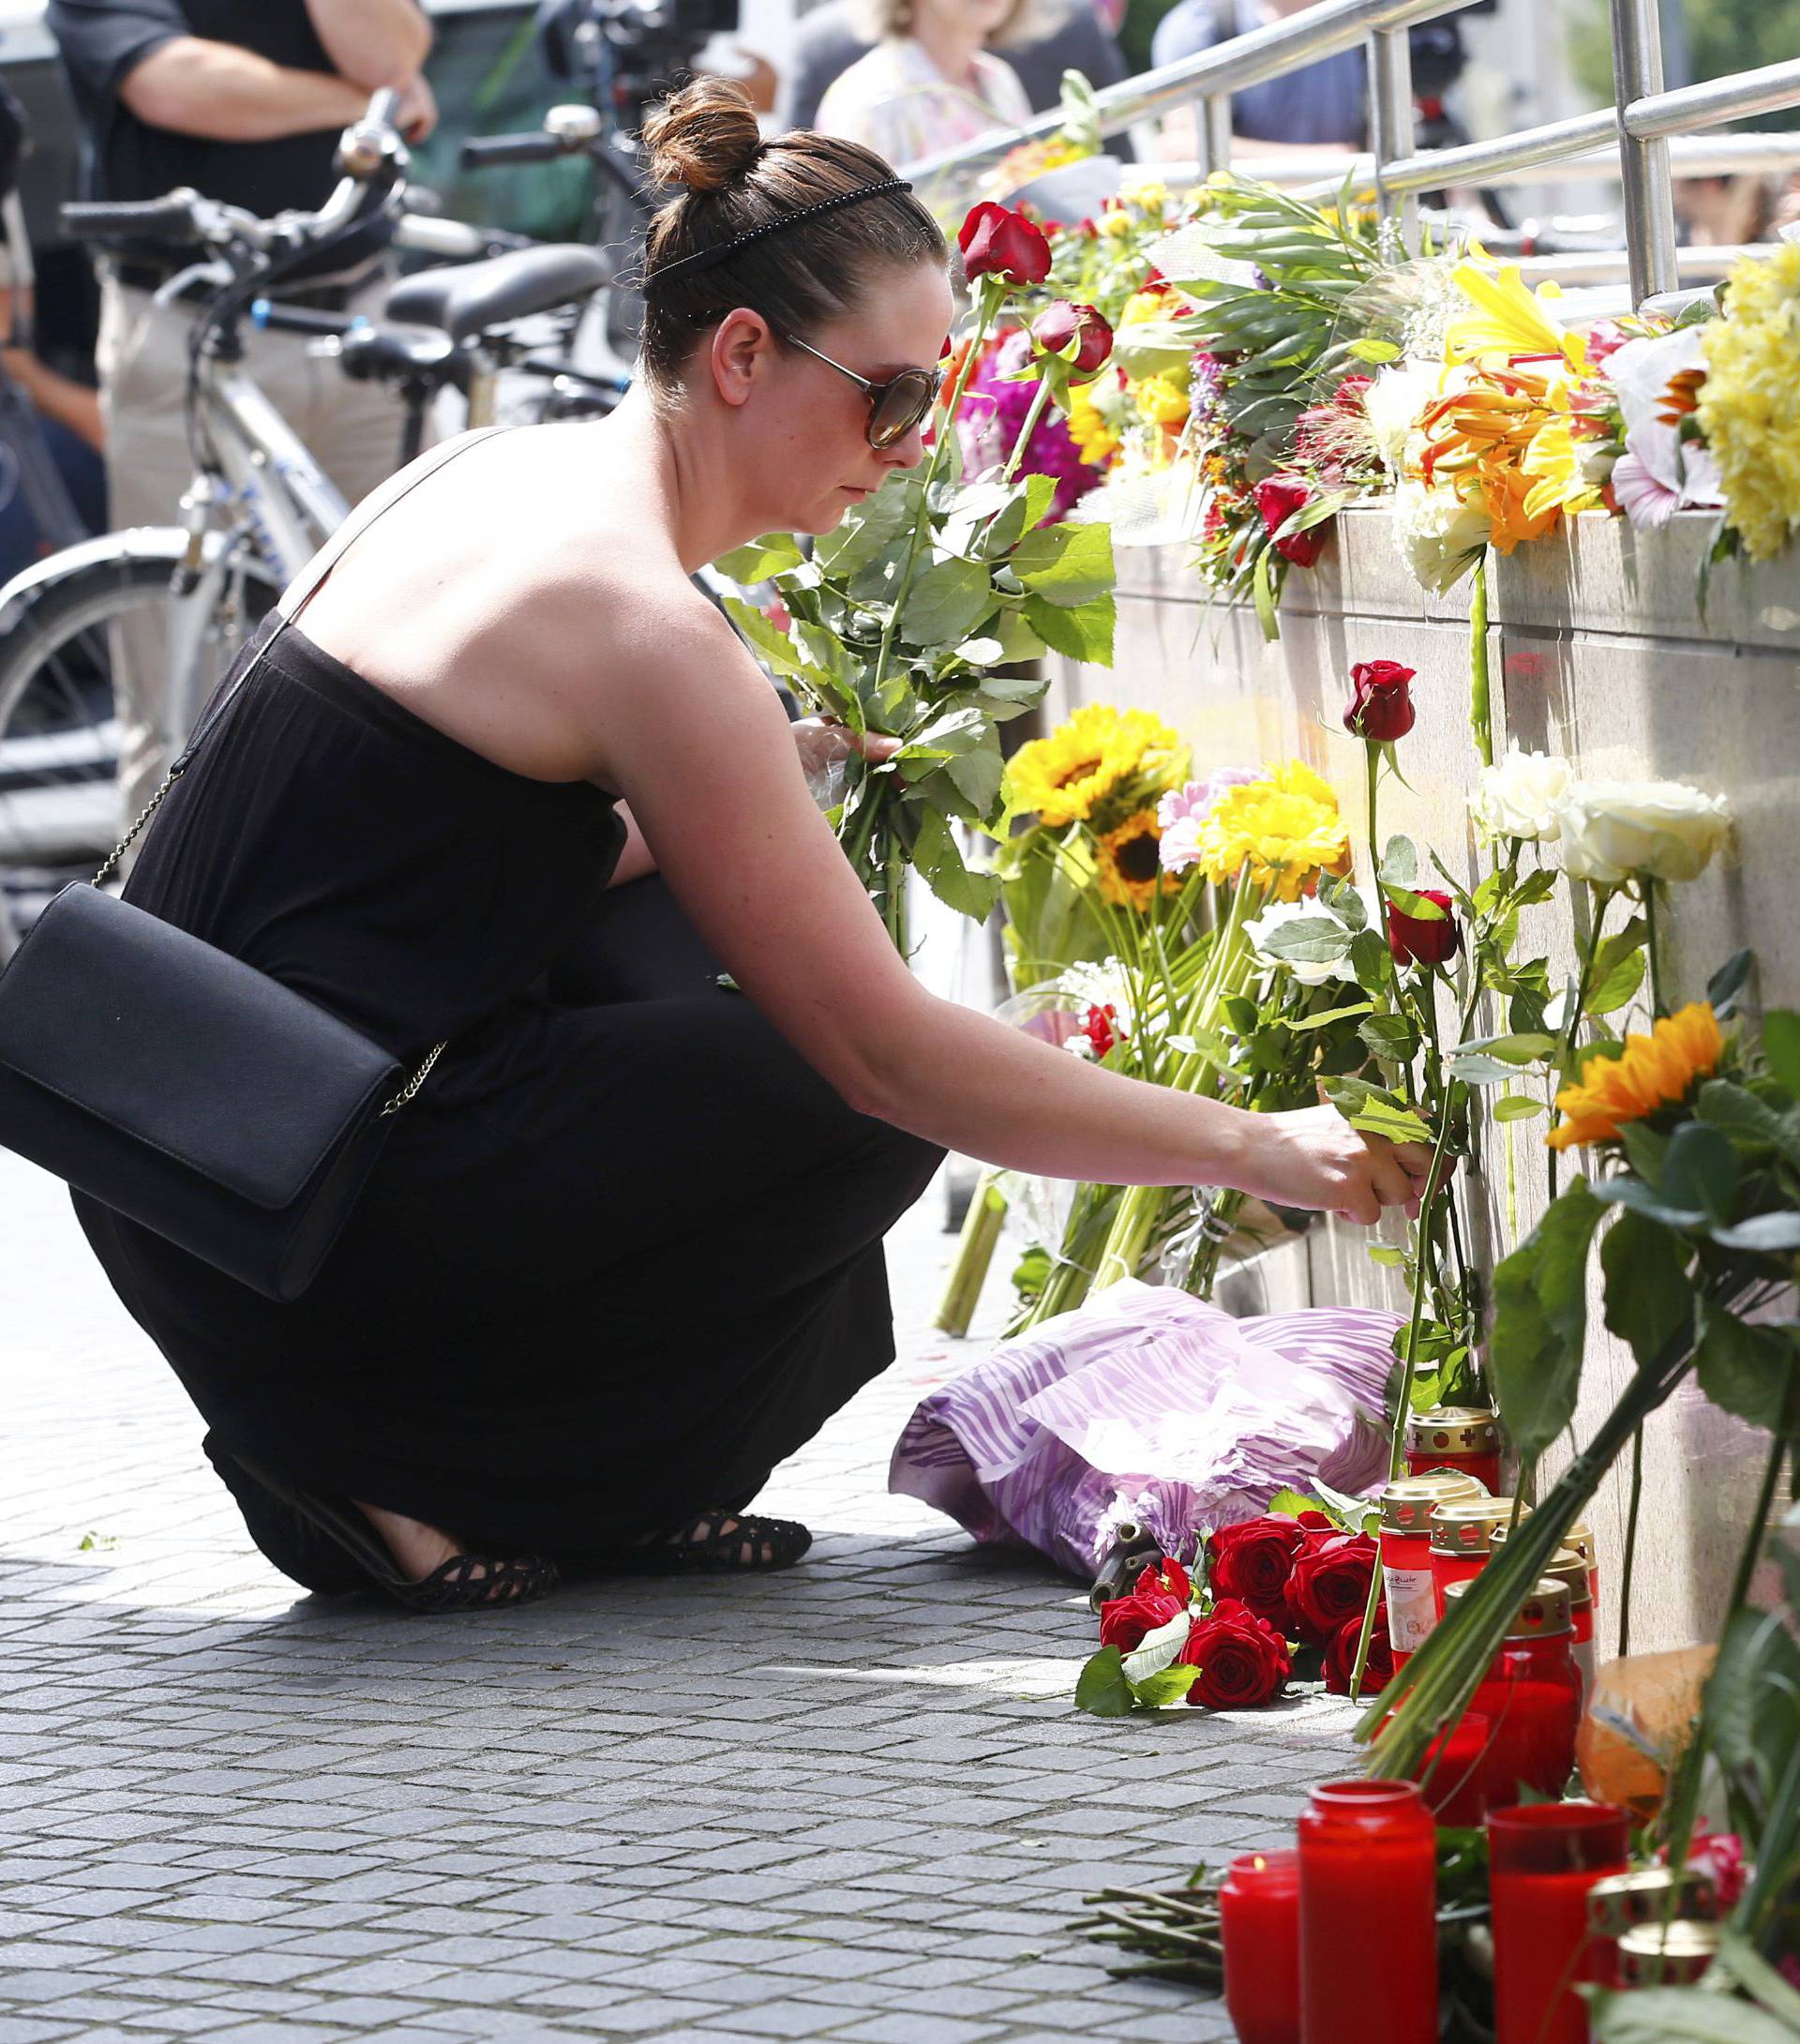 A women places flowers near Olympia shopping mall in Munich